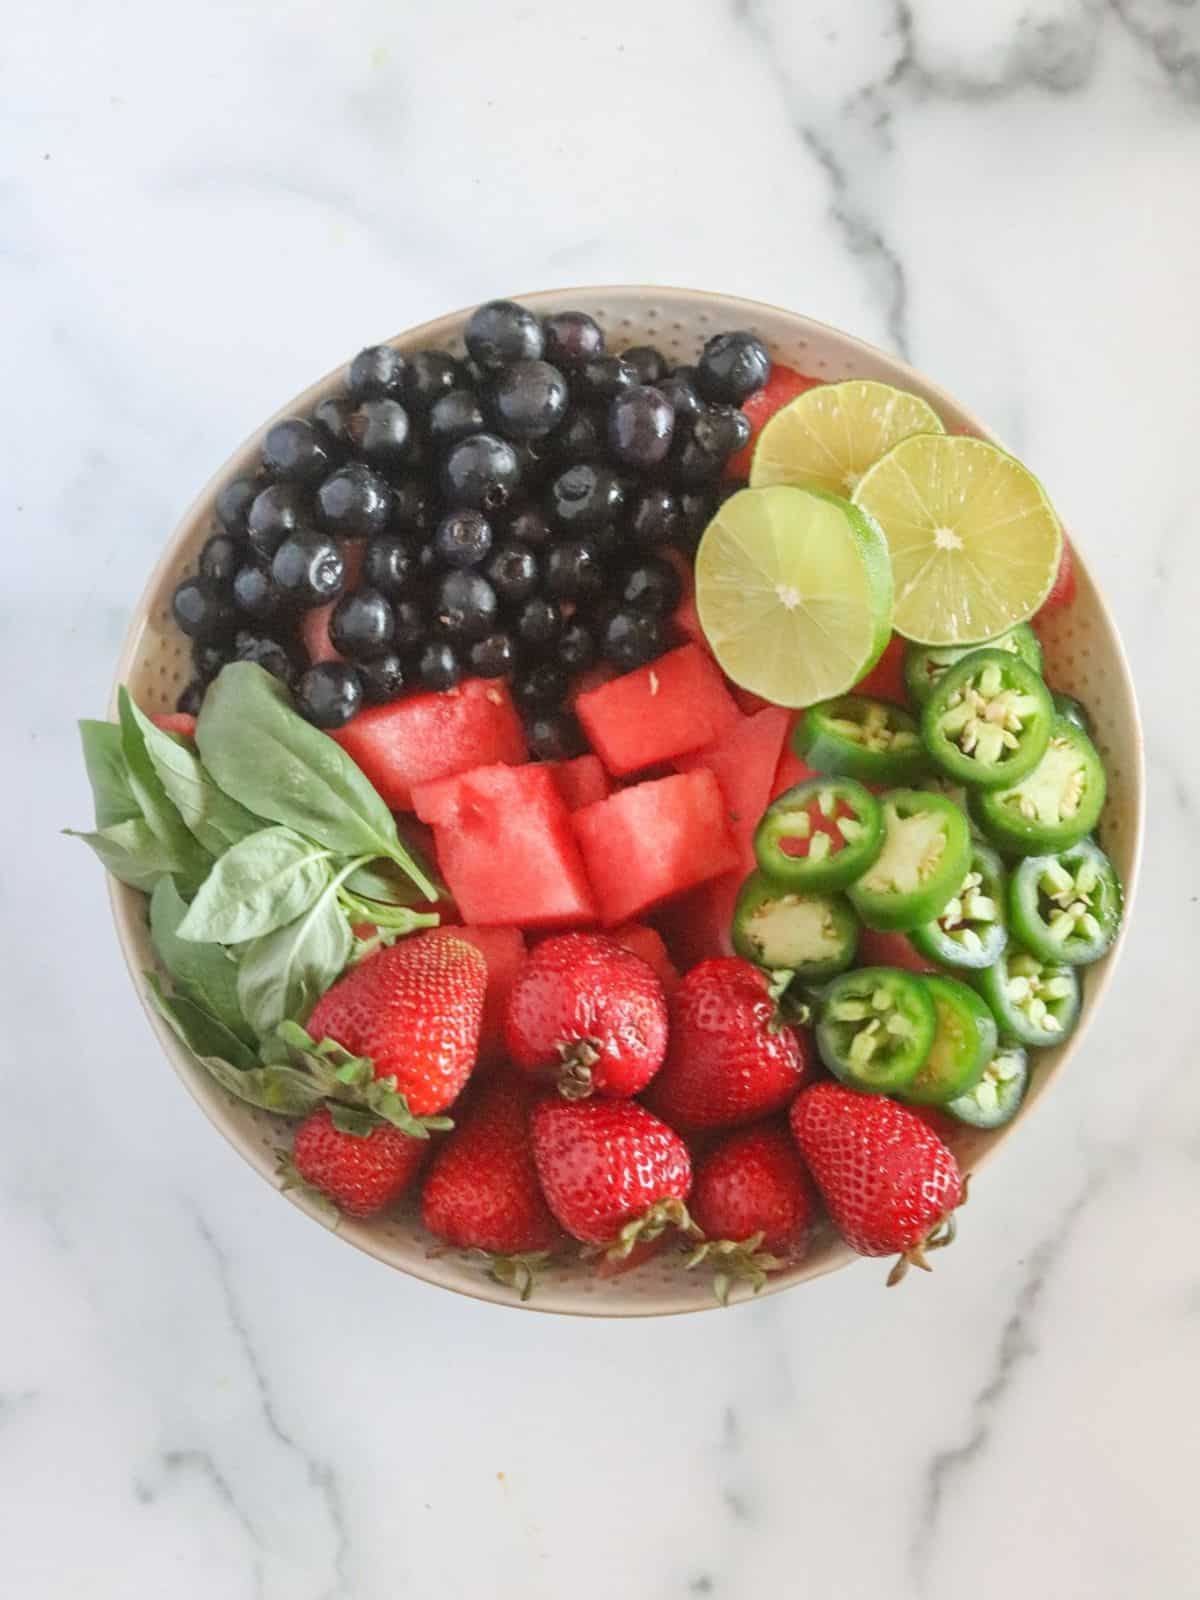 Assorted fruits in bowl with herbs and peppers